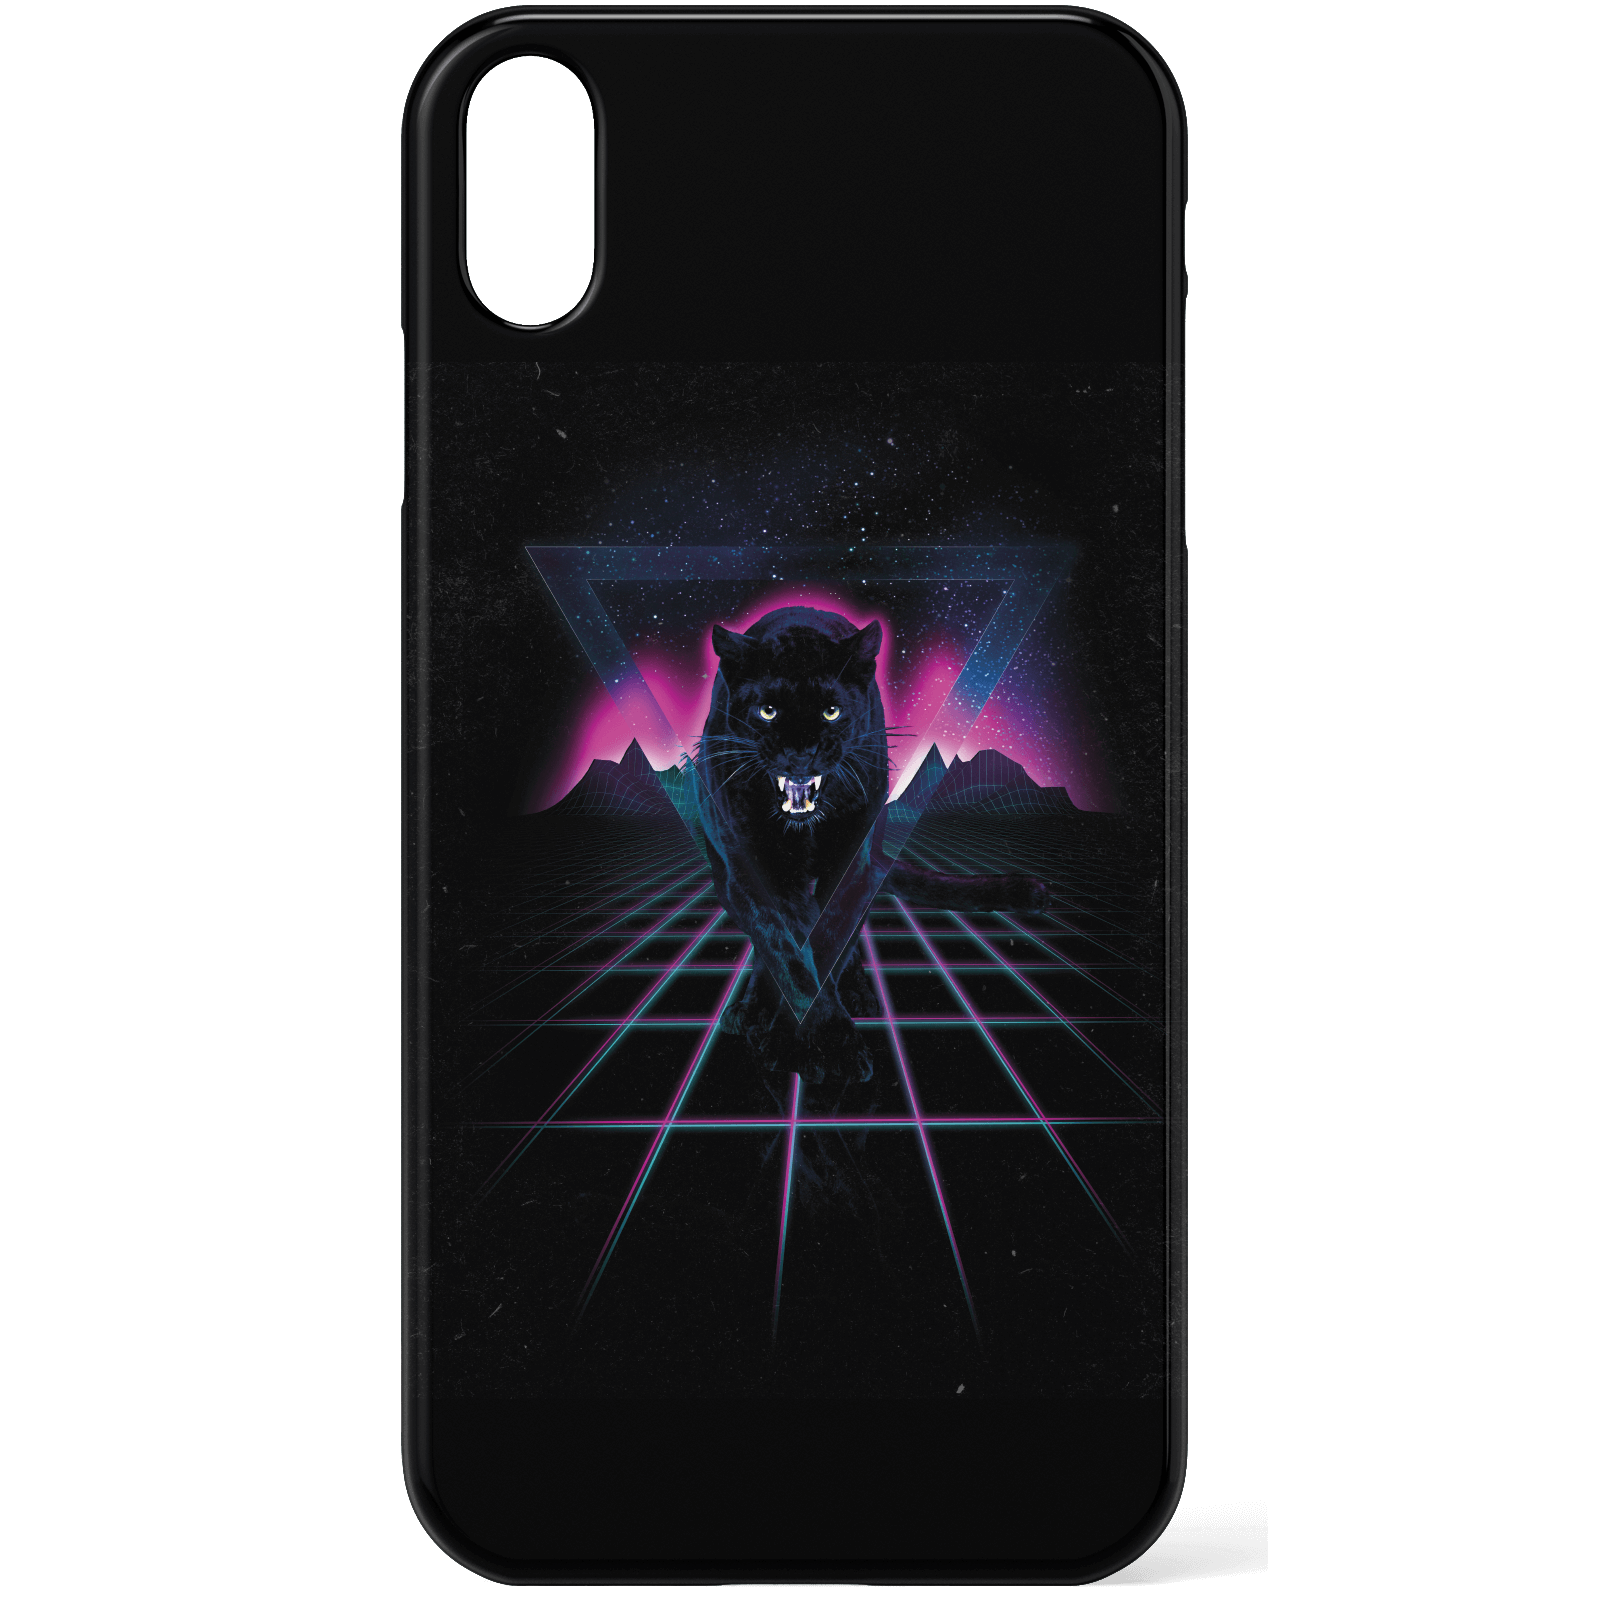 Jaguar Phone Case for iPhone and Android - iPhone XS - Snap Case - Matte